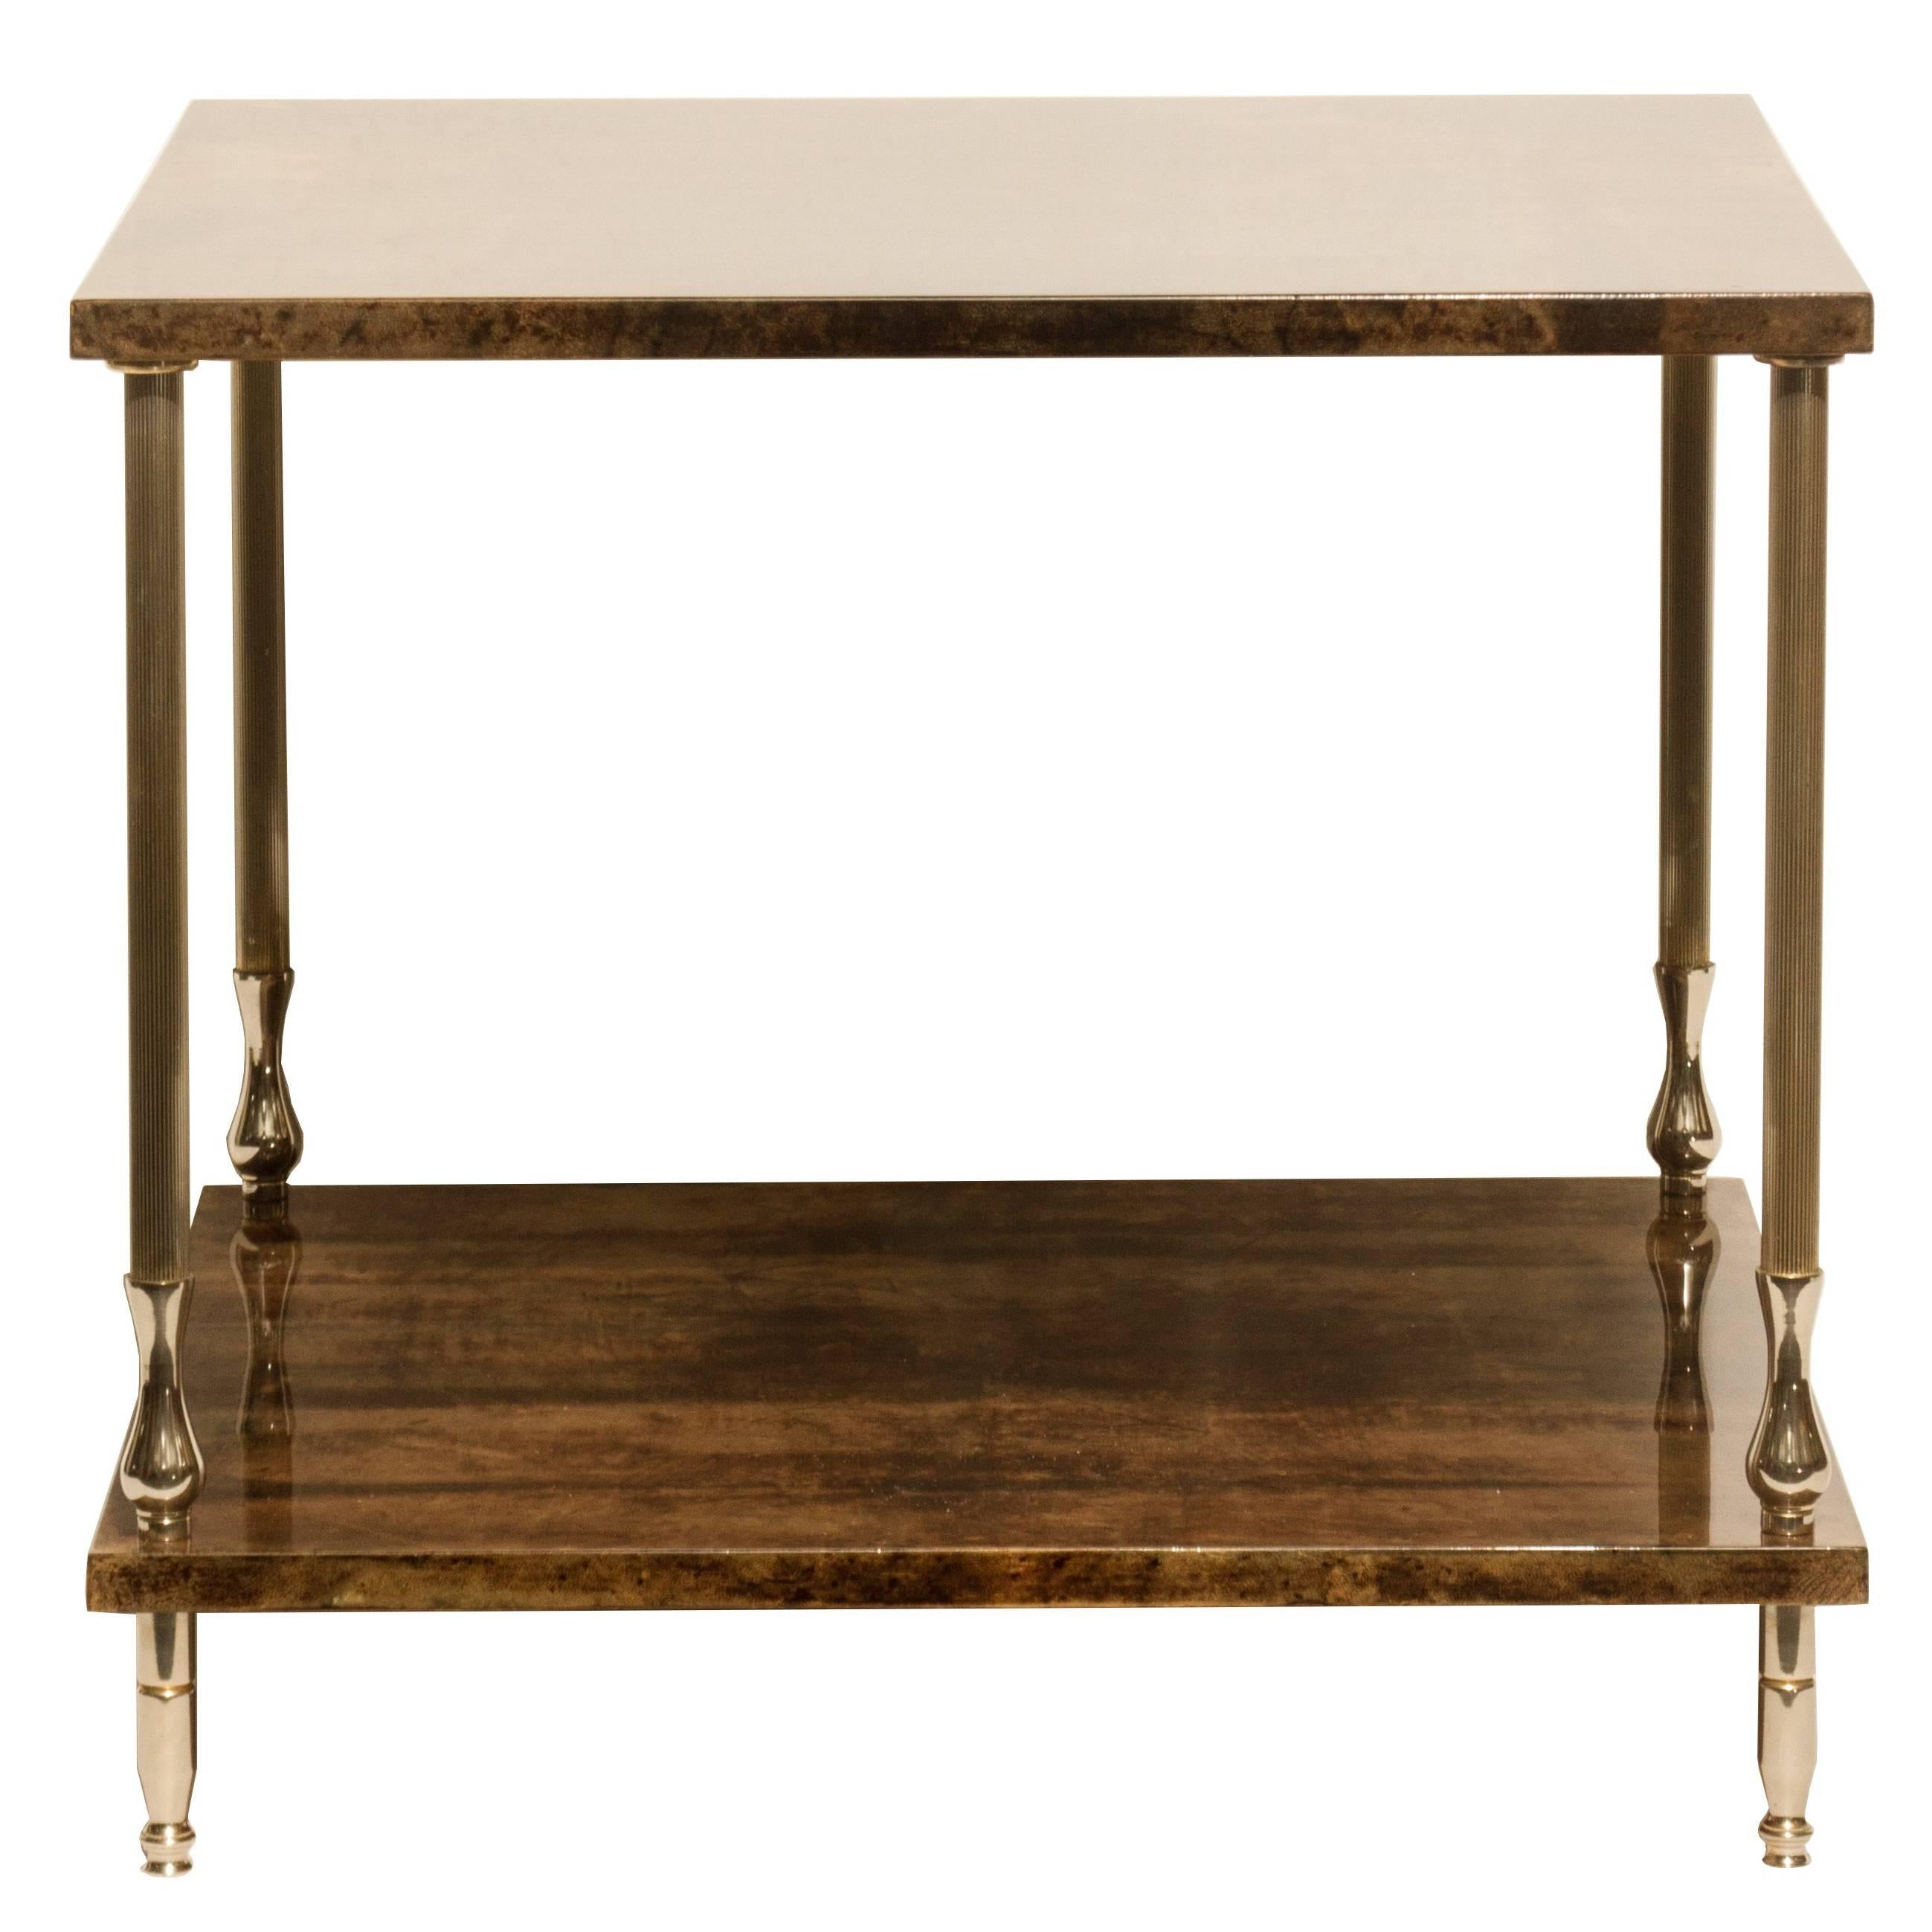 Aldo Tura Lacquered Parchment Two-Tiered Table